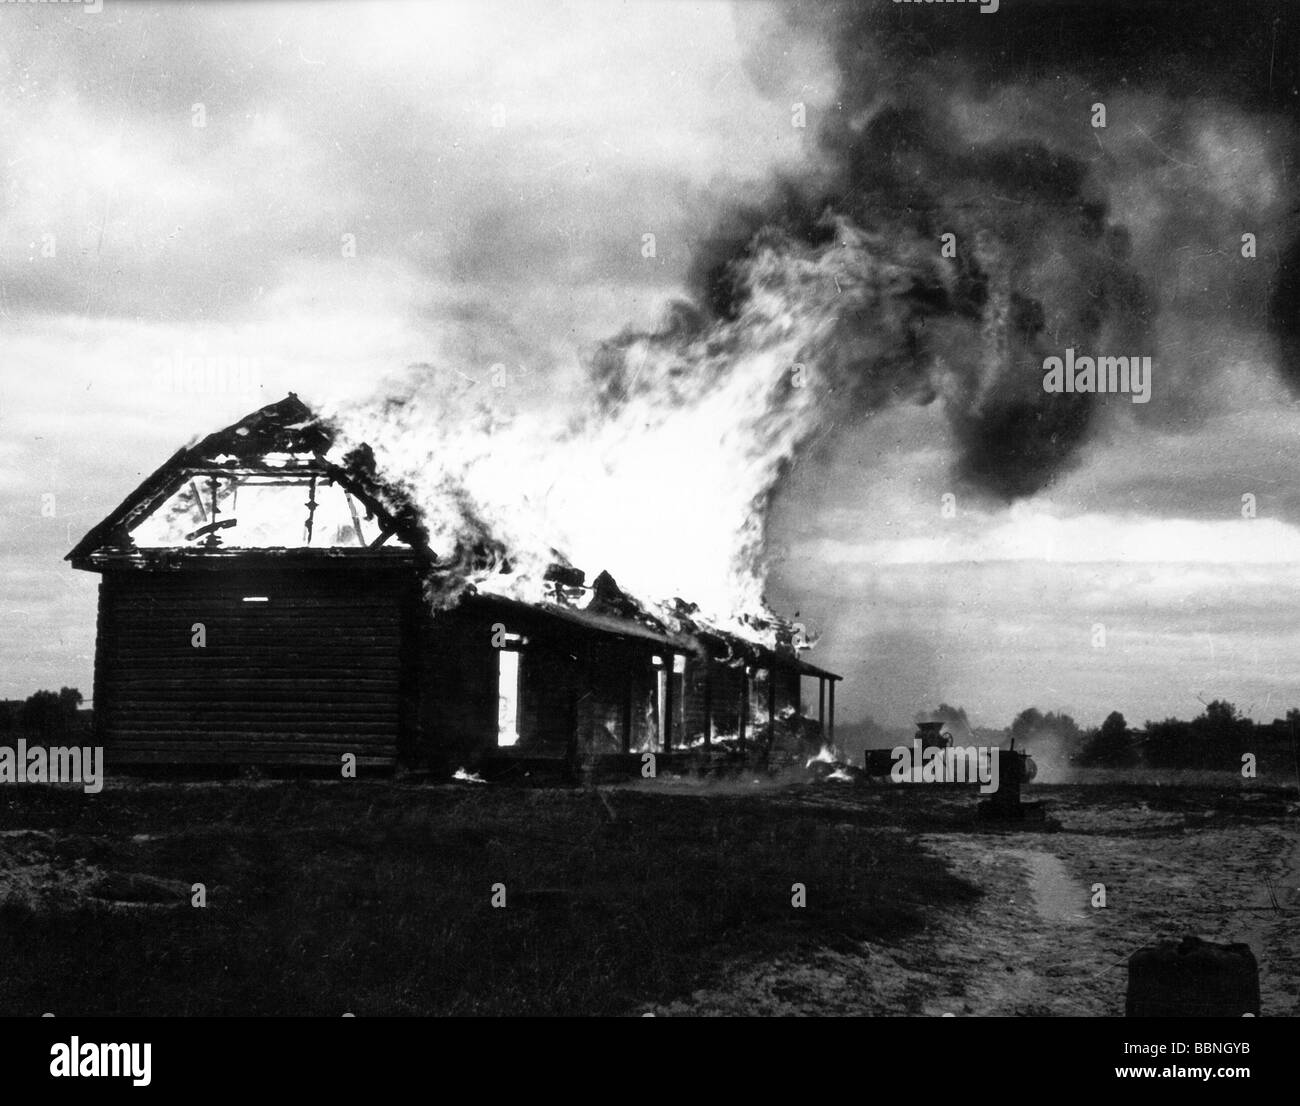 events, Second World War / WWII, Russia 1942 / 1943, burning farmhouse, circa 1942, fire, destruction, 20th century, historic, historical, Eastern Front, USSR, Soviet Union, flames, farm house, 1940s, Stock Photo